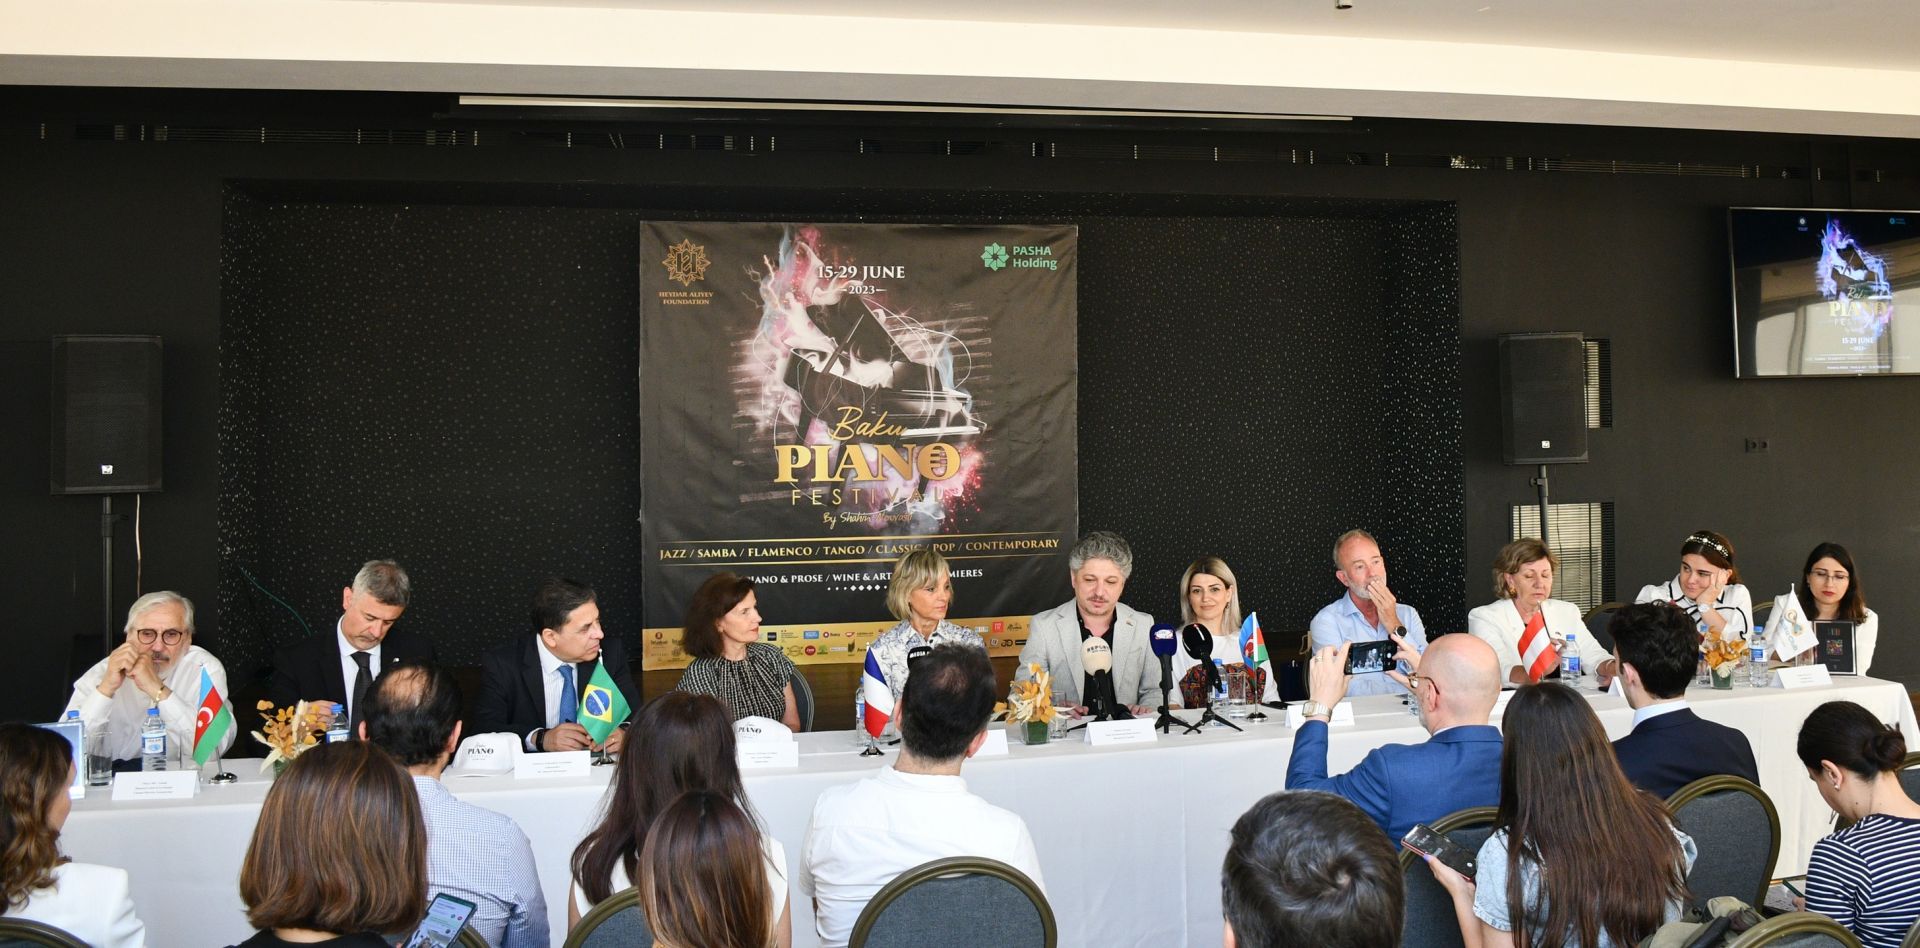 Baku Piano Festival promises to be delightful treat for all music lovers [PHOTOS]